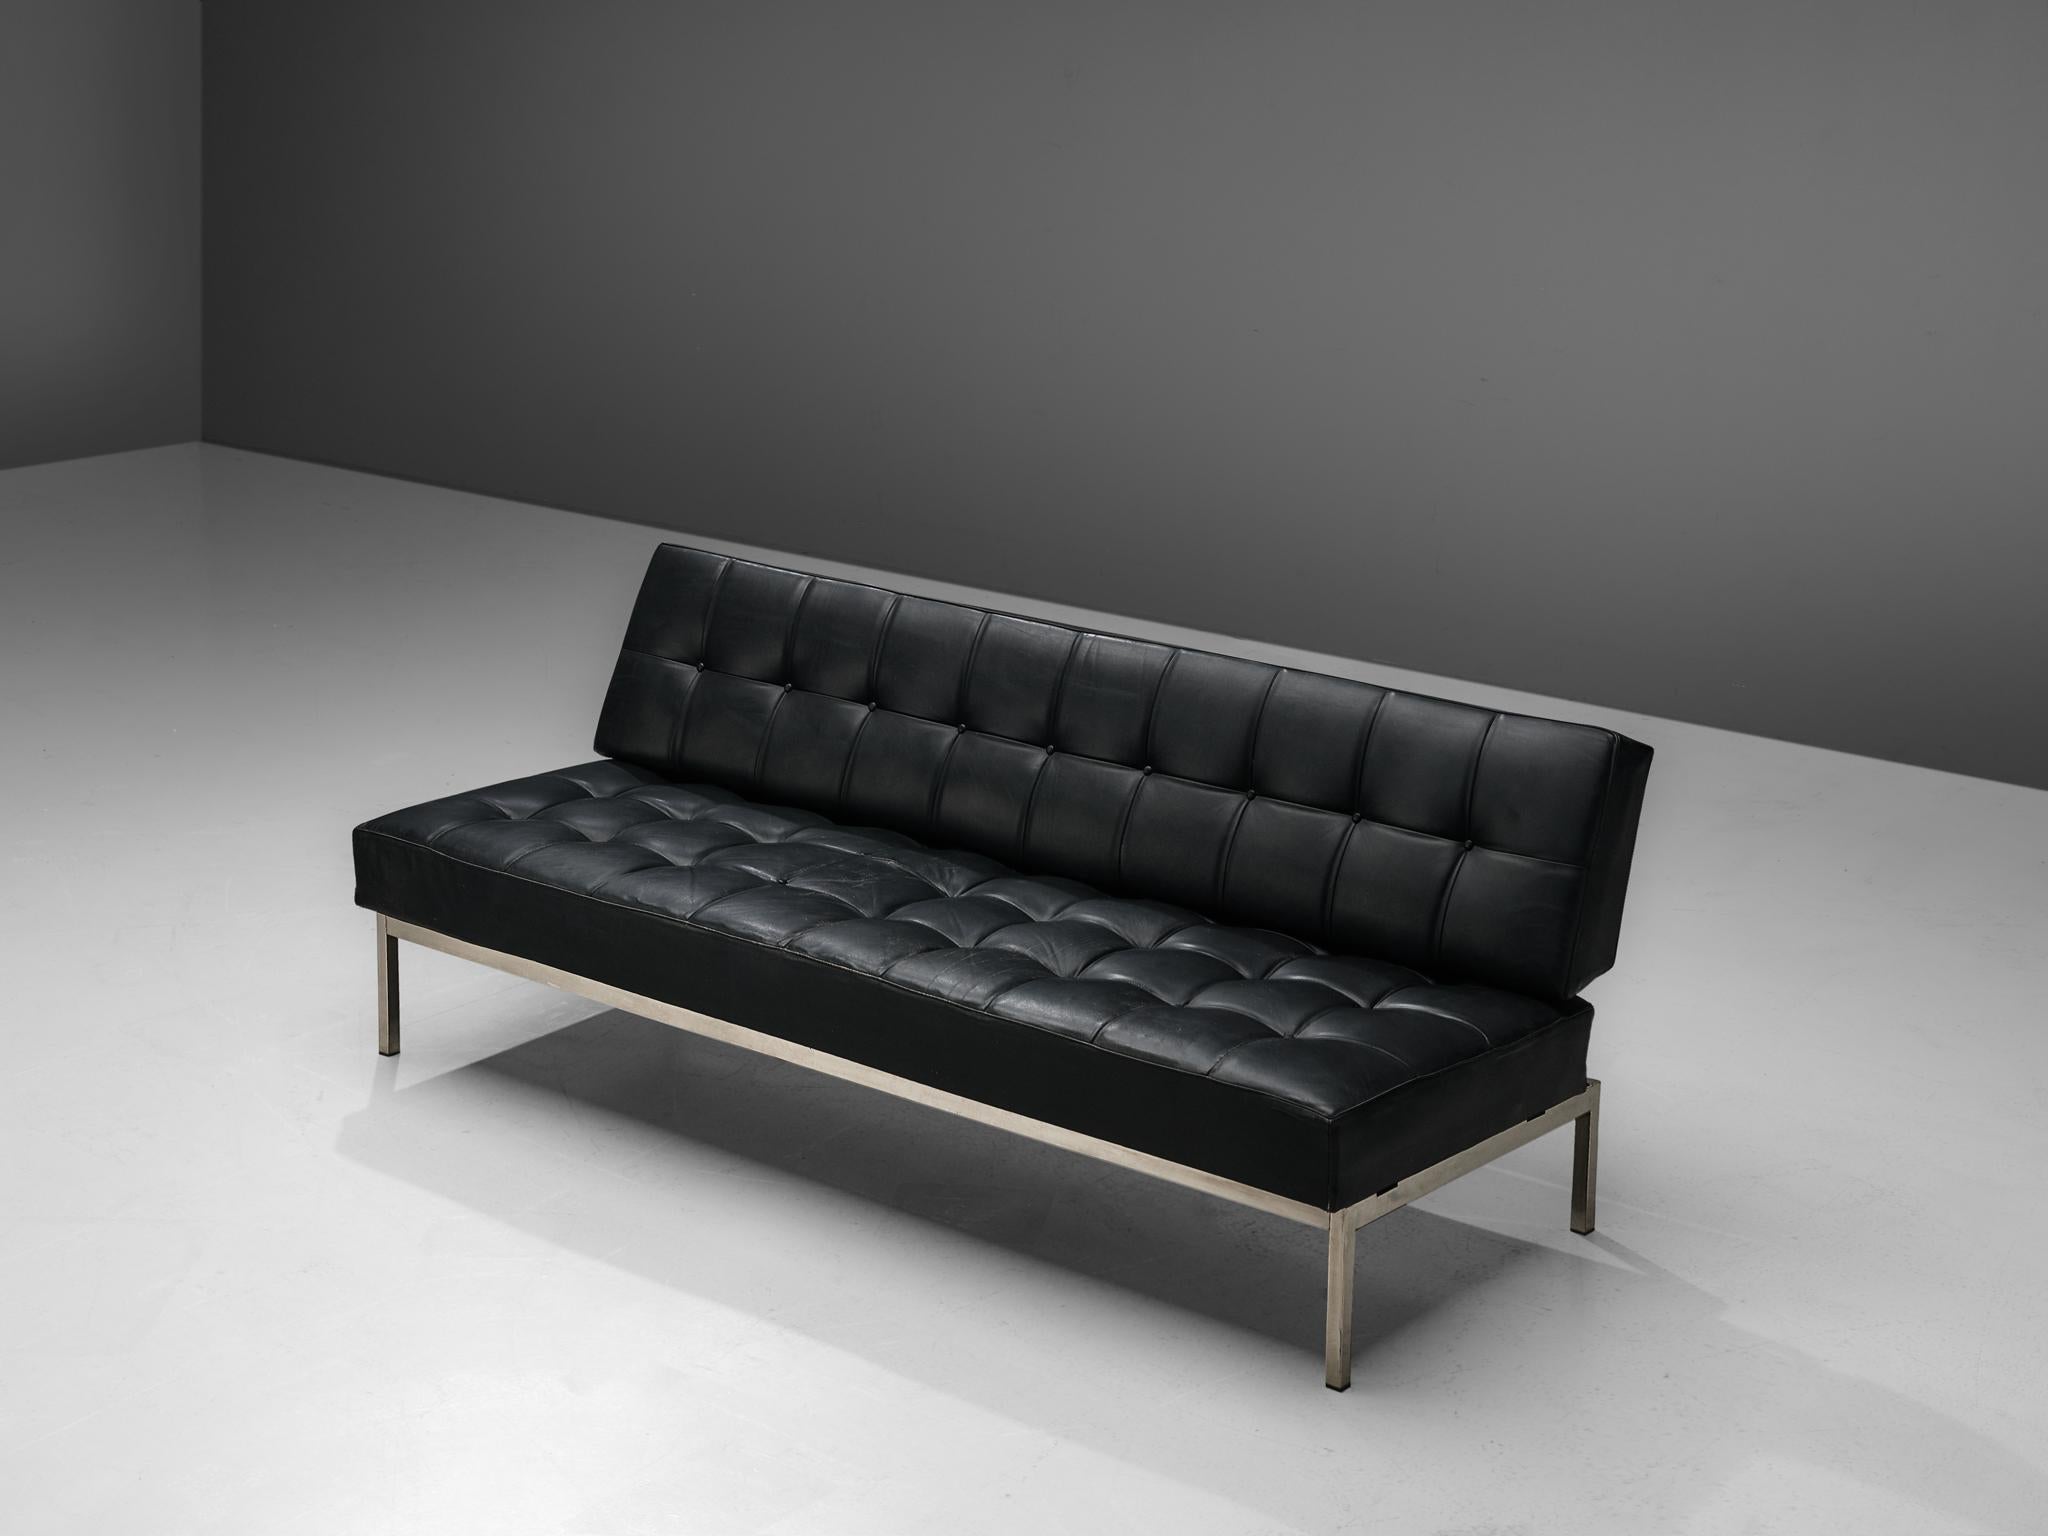 Johannes Spalt for Wittmann, sofa or daybed, leather, chrome-plated steel, Austria, 1960s.

This mid-century modern sofa is designed by the talented Austrian furniture designer Johannes Spalt. The design is characterized by a solid construction